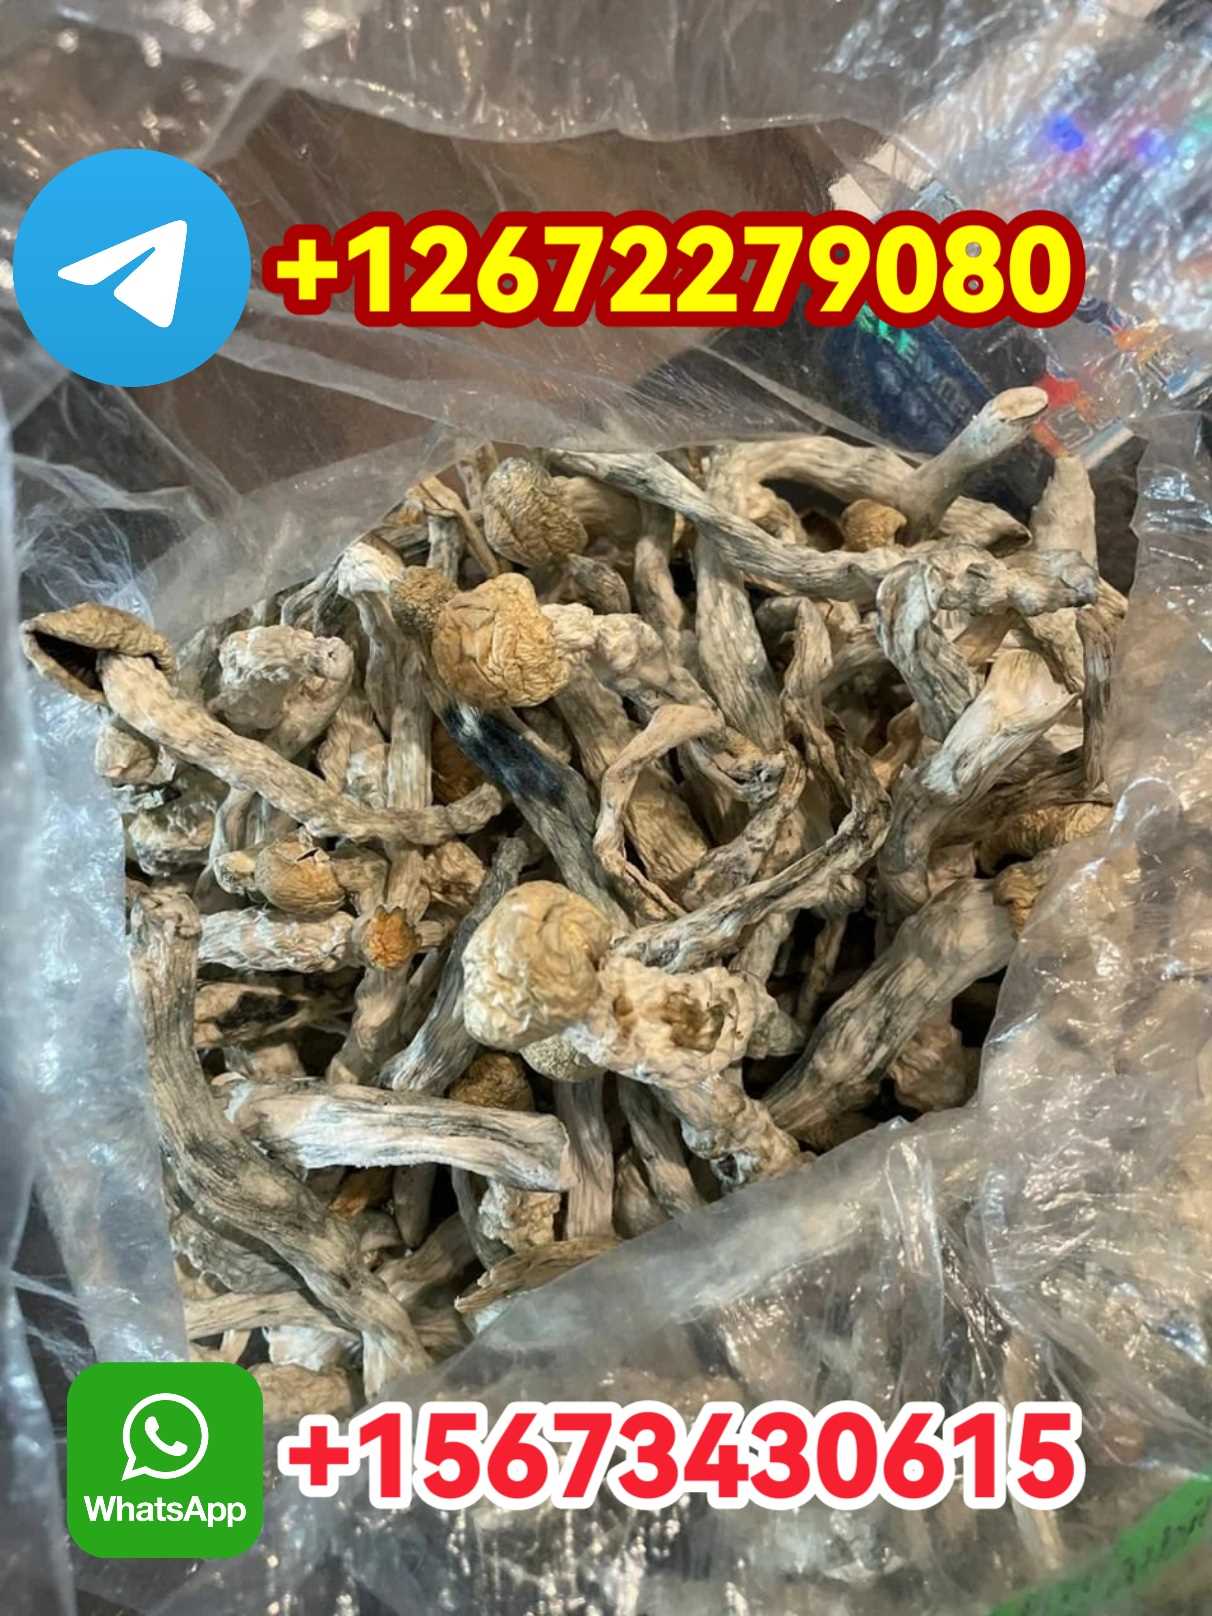 +12672279080 TO ORDE THC OIL, XANAX AND SHROOMS IN SWEDEN AND NORWAY